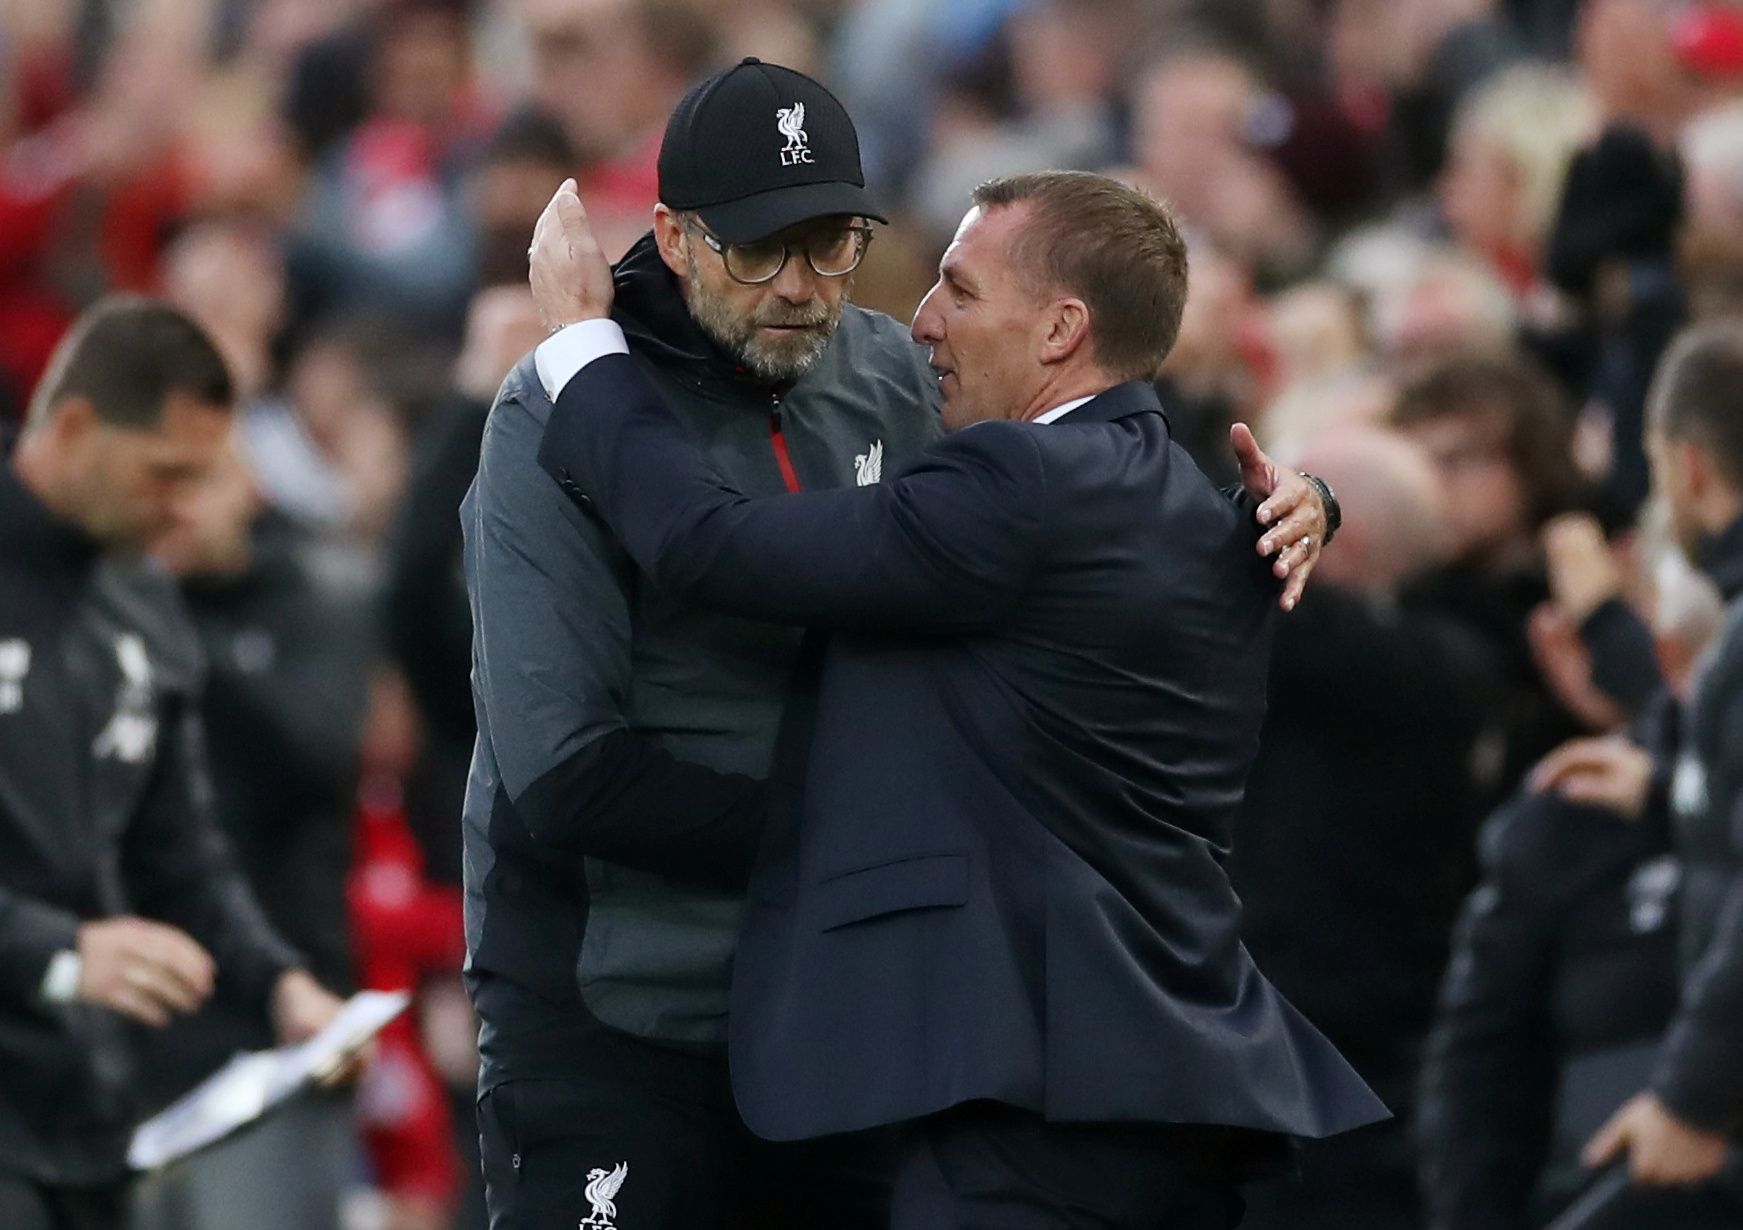 Soccer Football - Premier League - Liverpool v Leicester City - Anfield, Liverpool, Britain - October 5, 2019  Liverpool manager Juergen Klopp shakes hands with Leicester City manager Brendan Rodgers after the match   Action Images via Reuters/Carl Recine  EDITORIAL USE ONLY. No use with unauthorized audio, video, data, fixture lists, club/league logos or 